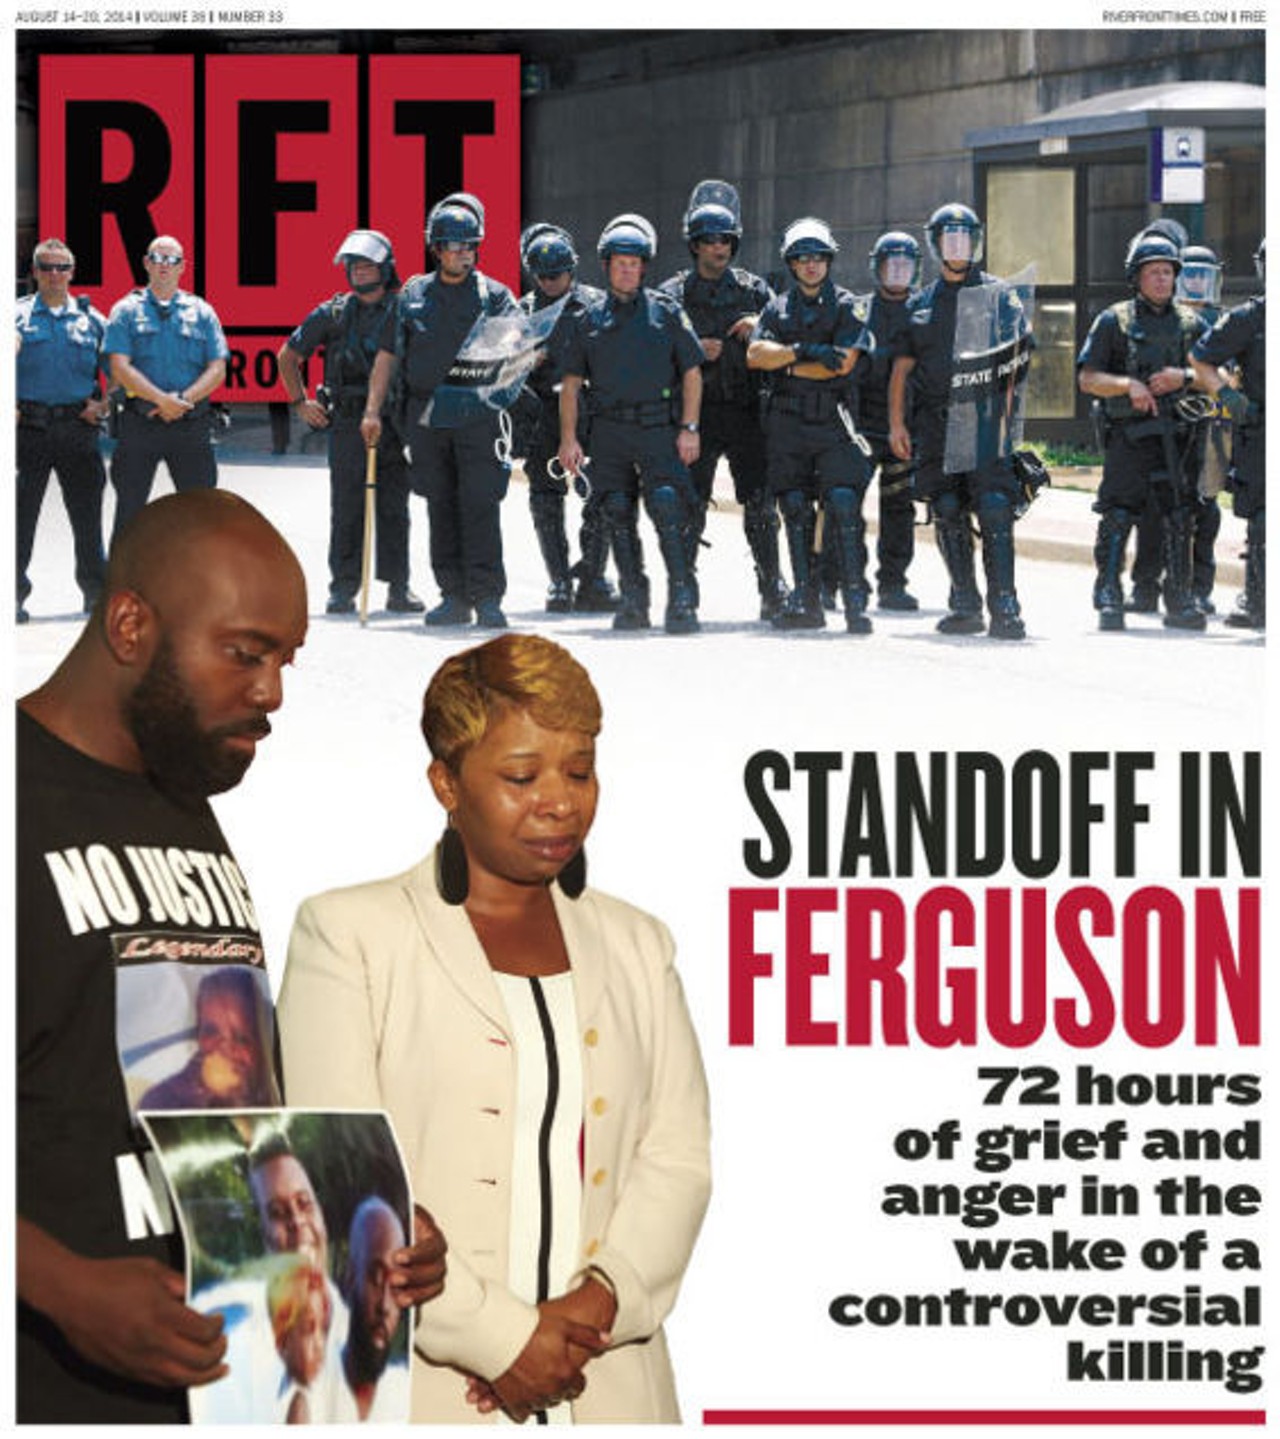 The cover of the August 14, 2014, edition of the Riverfront Times.